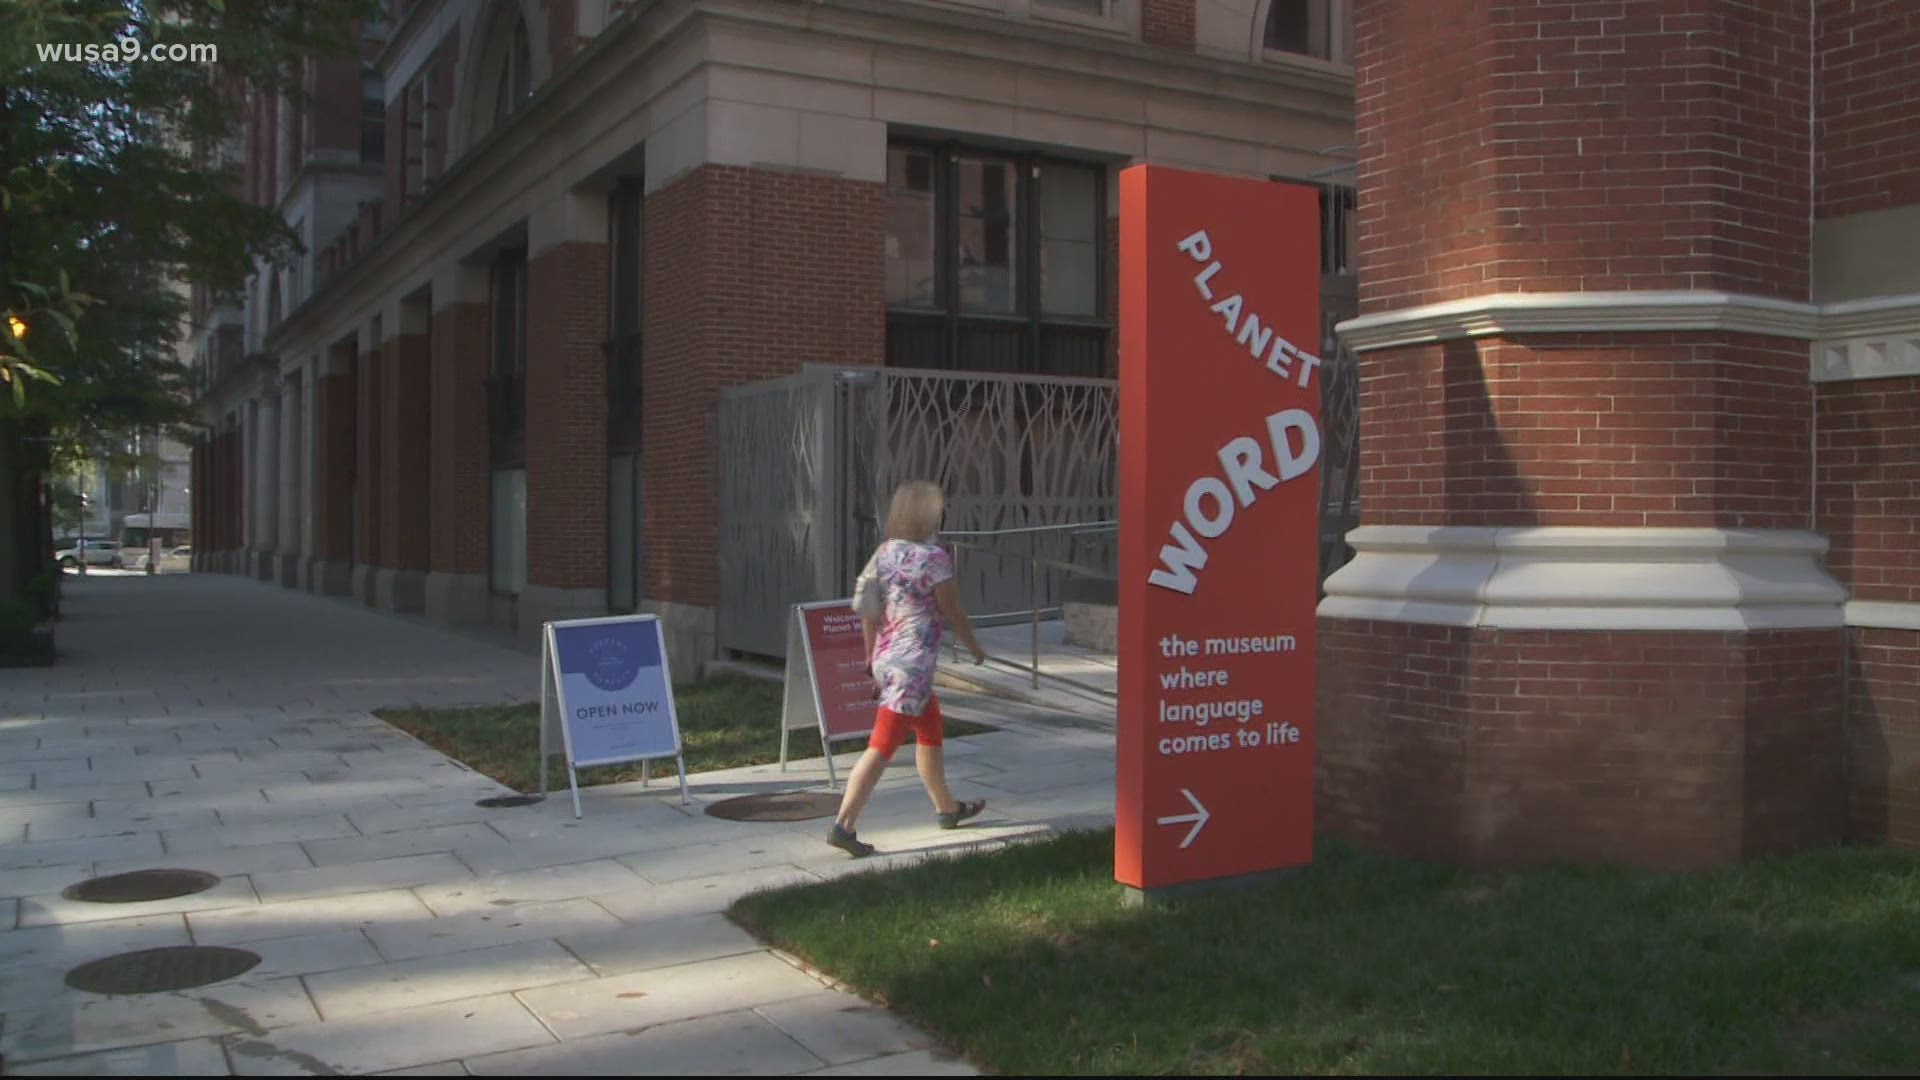 The world's first voice activated museum opens in Washington, D.C.